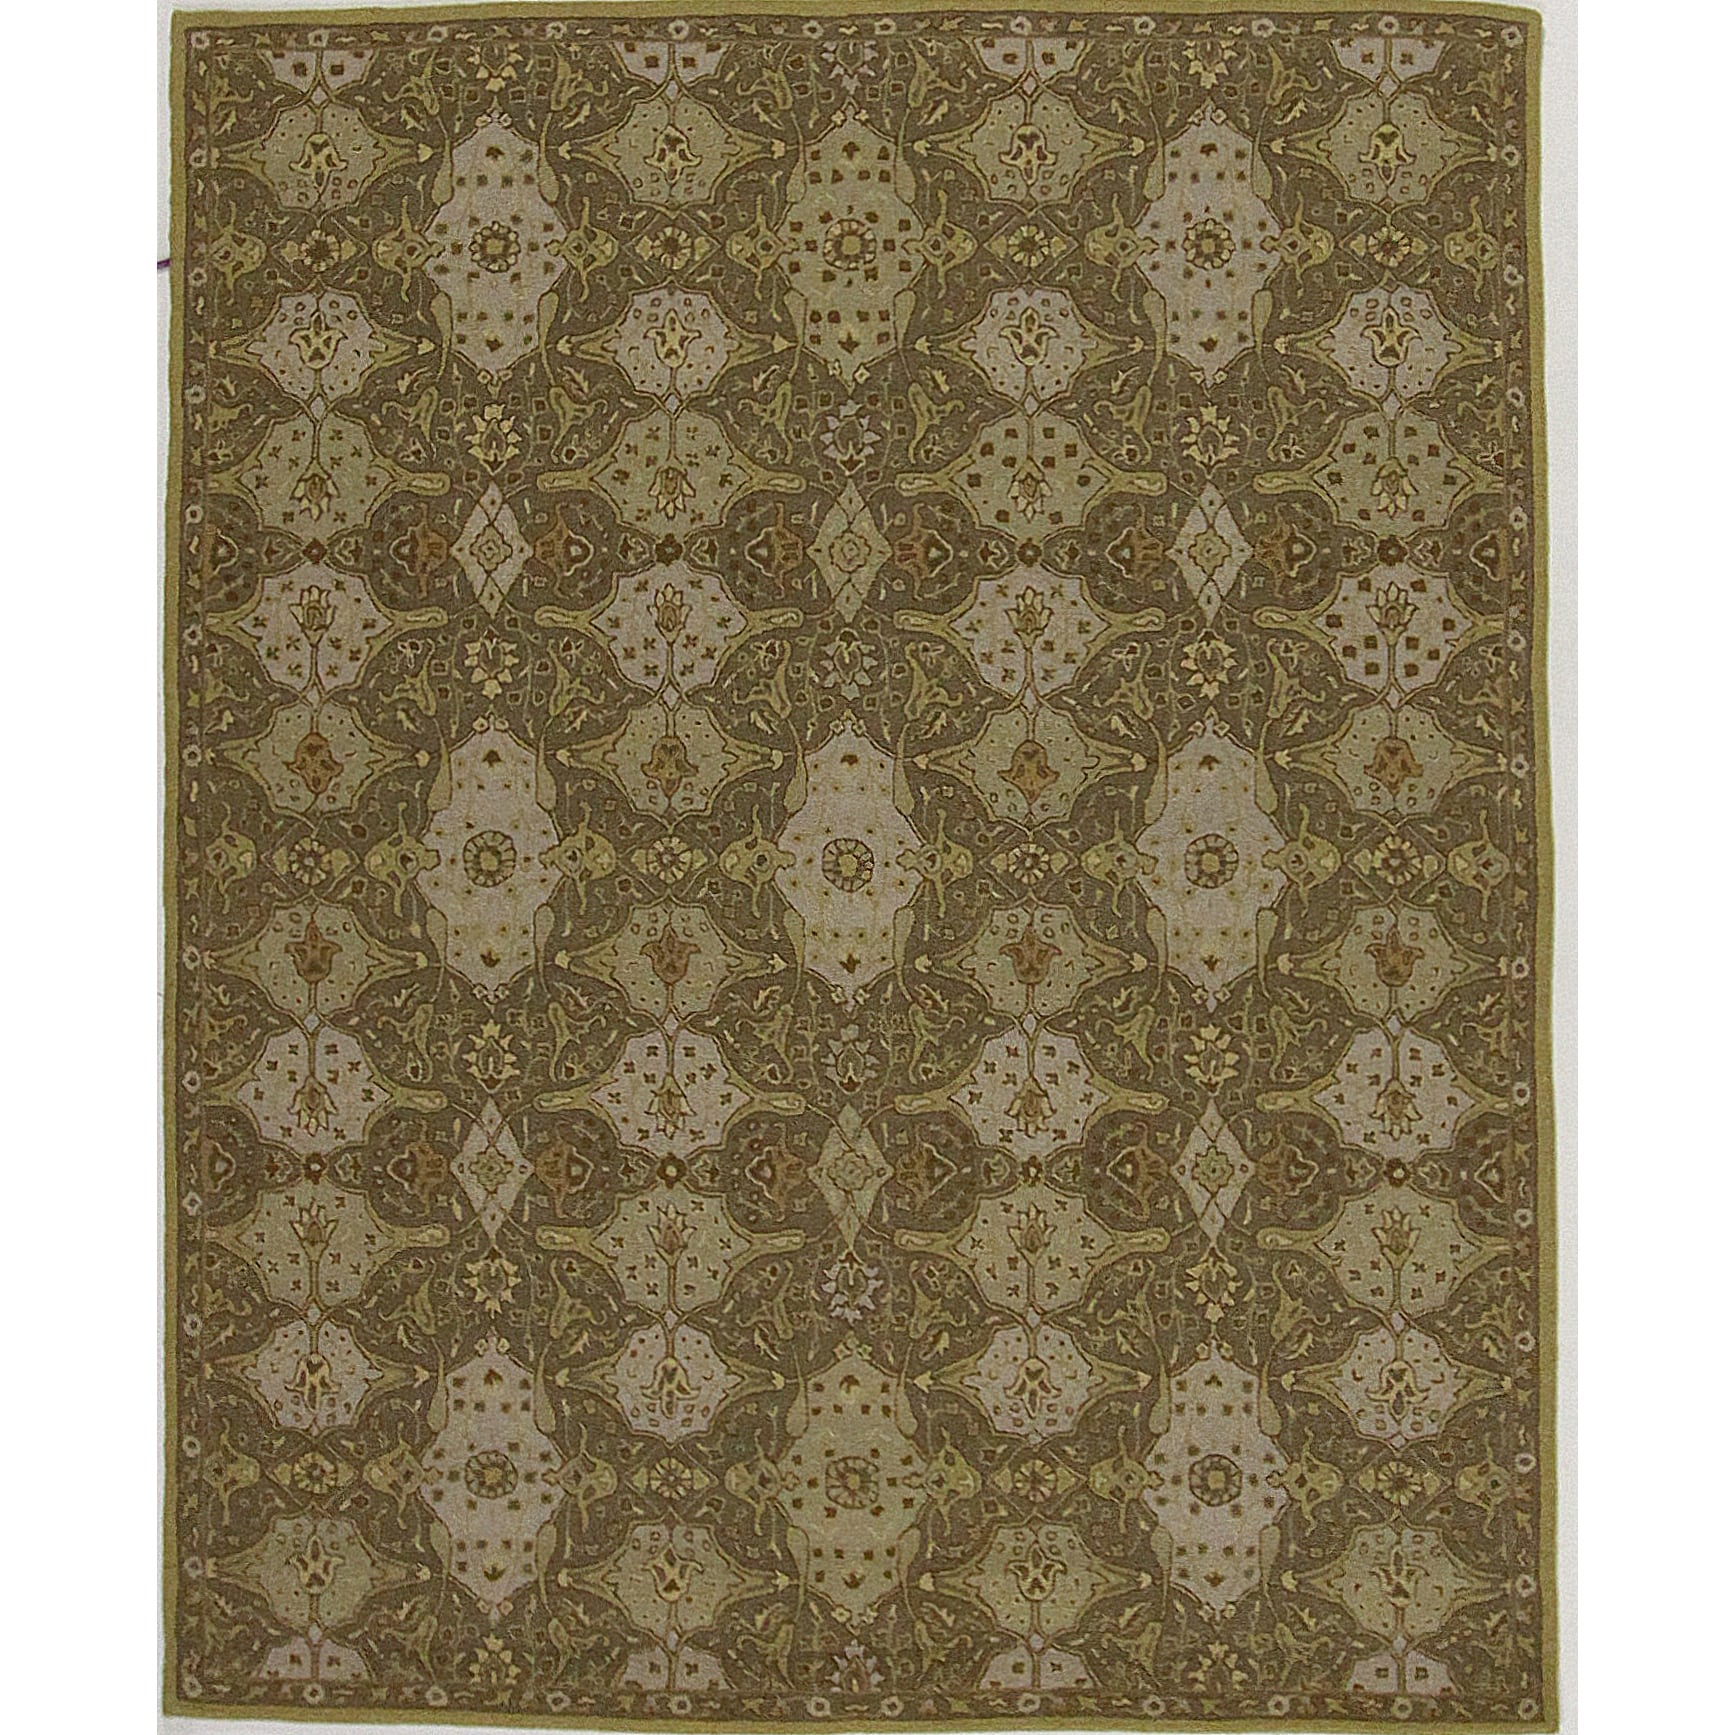 Hand tufted Brown Transitional Floral Wool Area Rug (5 X 8)